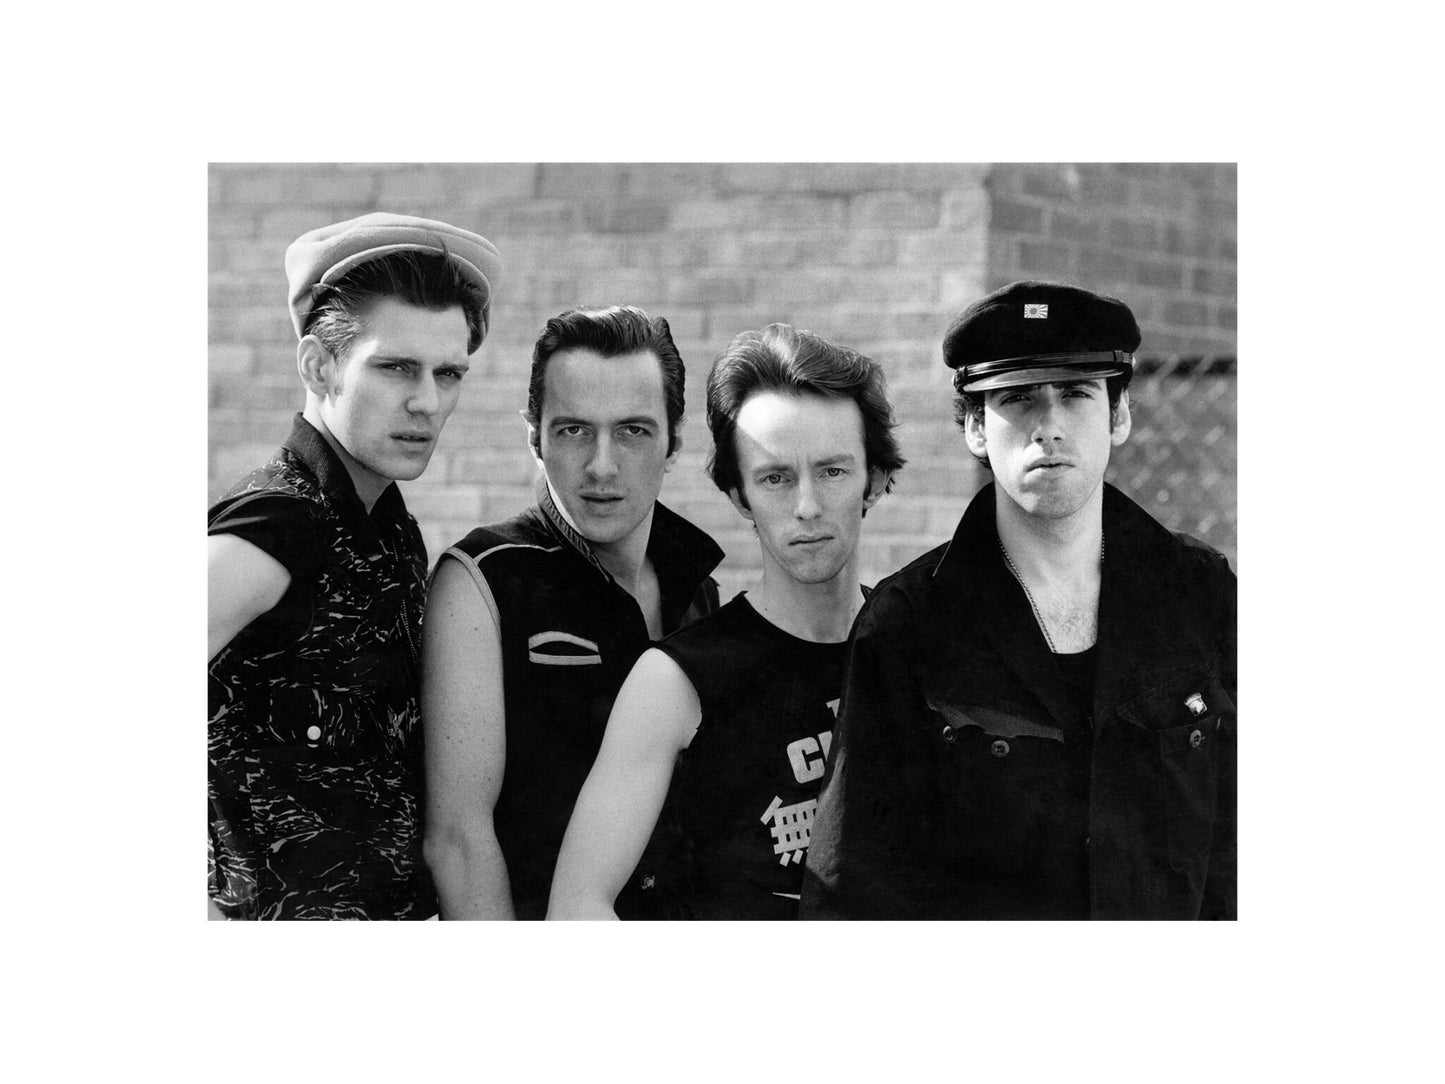 The Clash – Black and White Band Portrait No.1, England, 1982